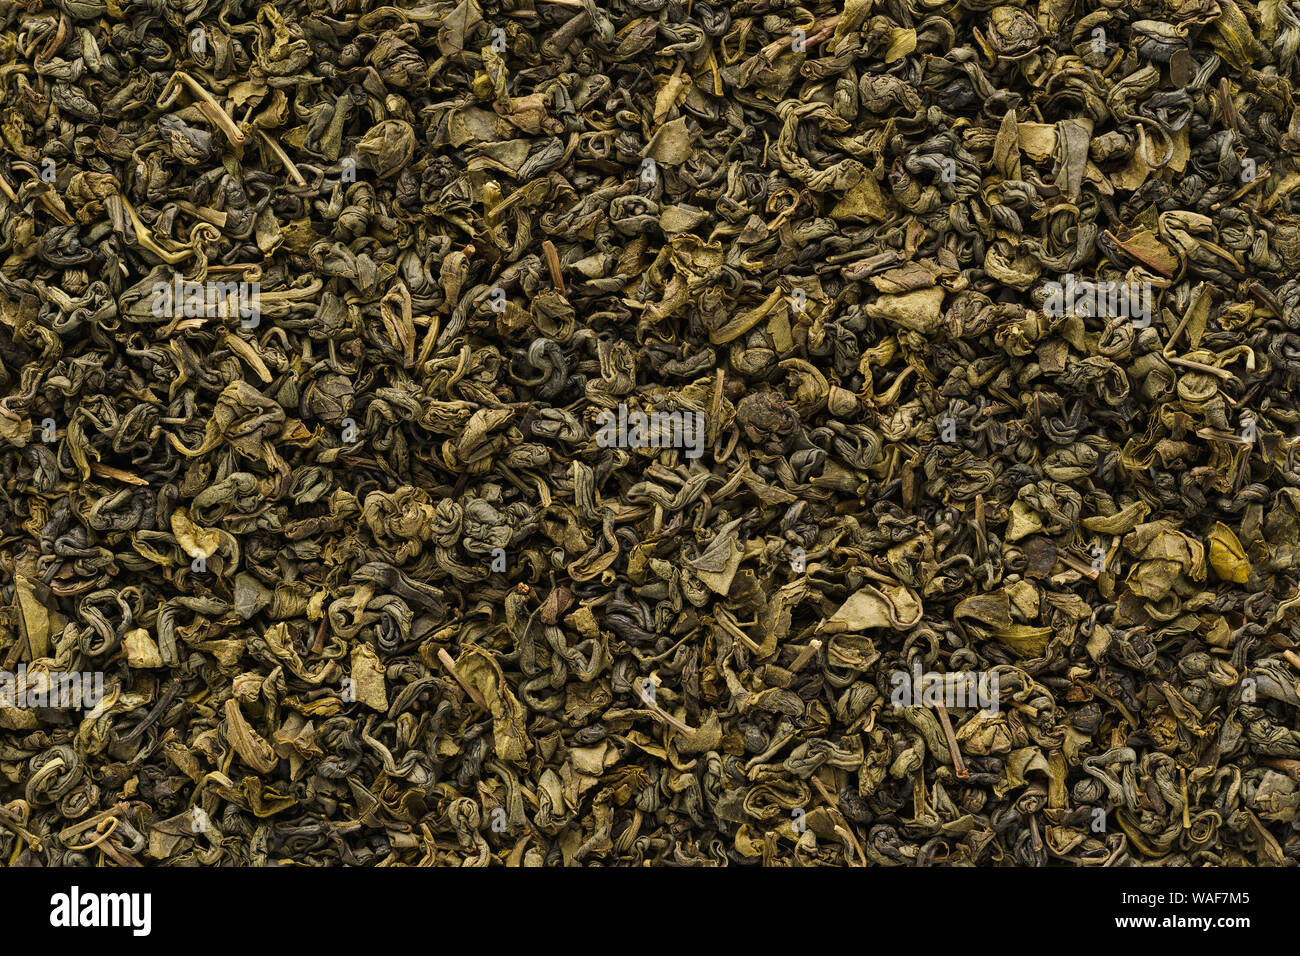 Dry oolong tea leaves as a background. Fermented Chinese tea shot from above. Stock Photo